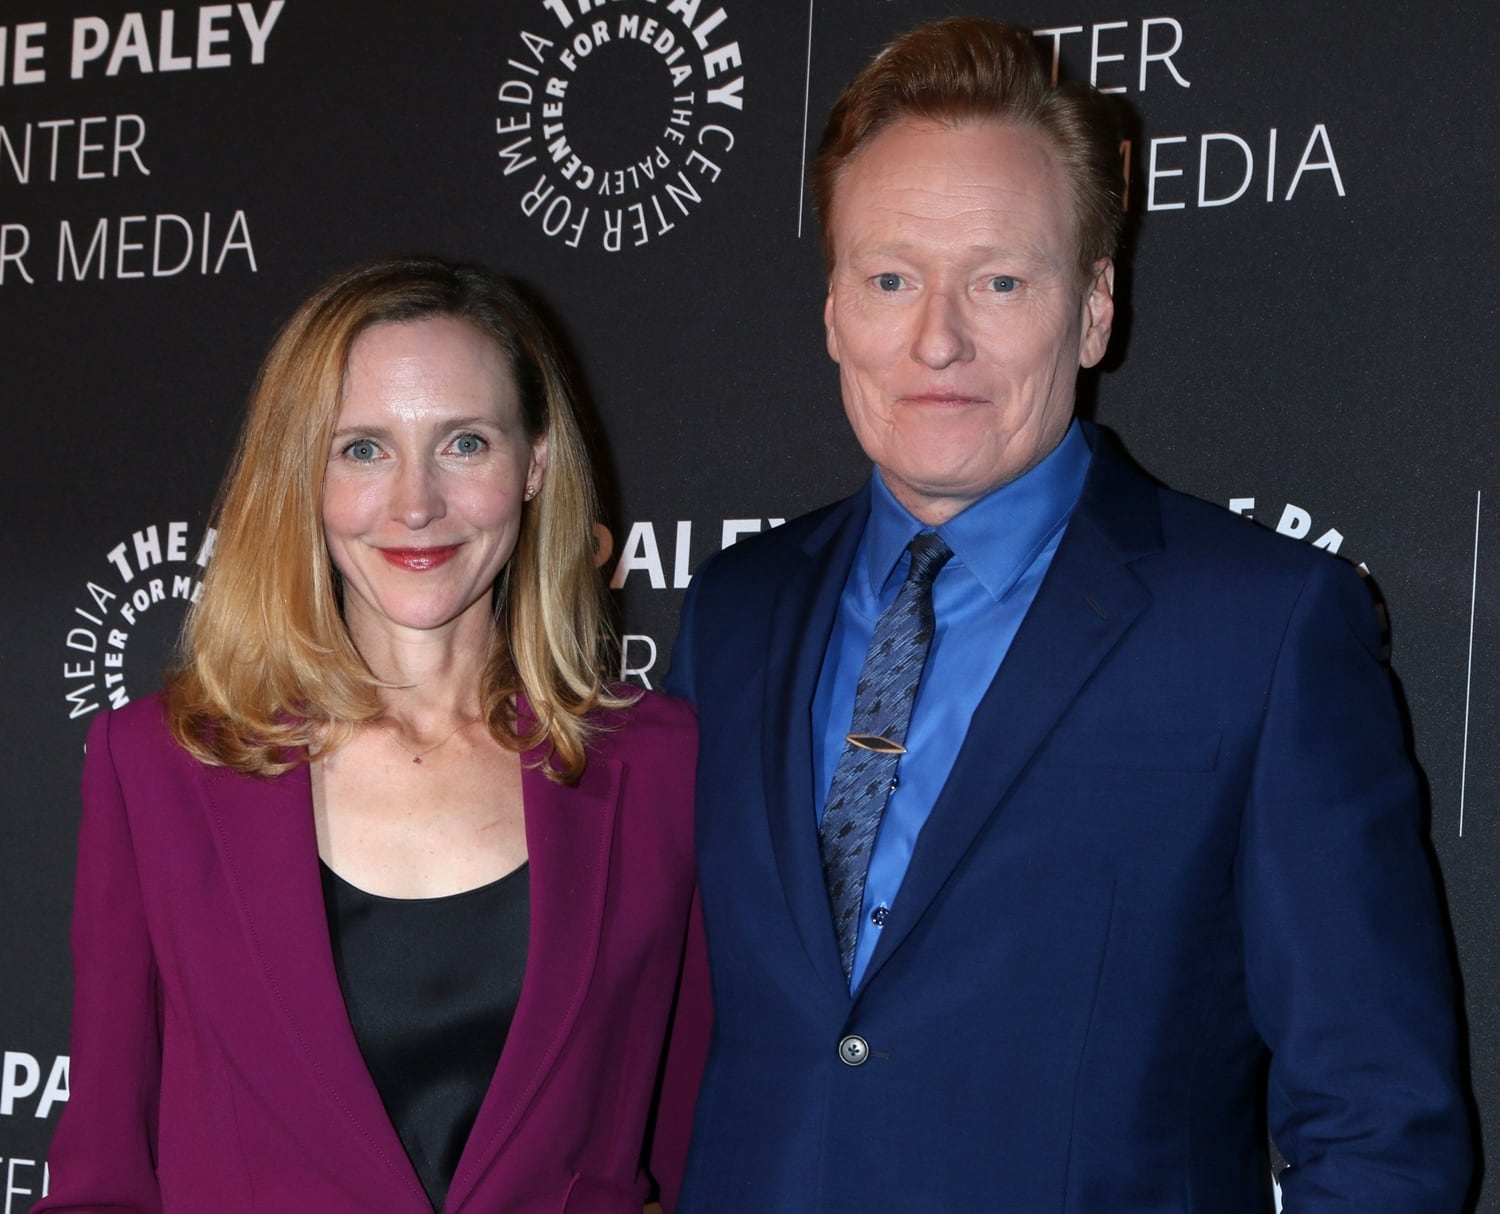 Liza Powel and her husband Conan OBrien arrive for The Paley Honors: A Special Tribute to Television's Comedy Legends